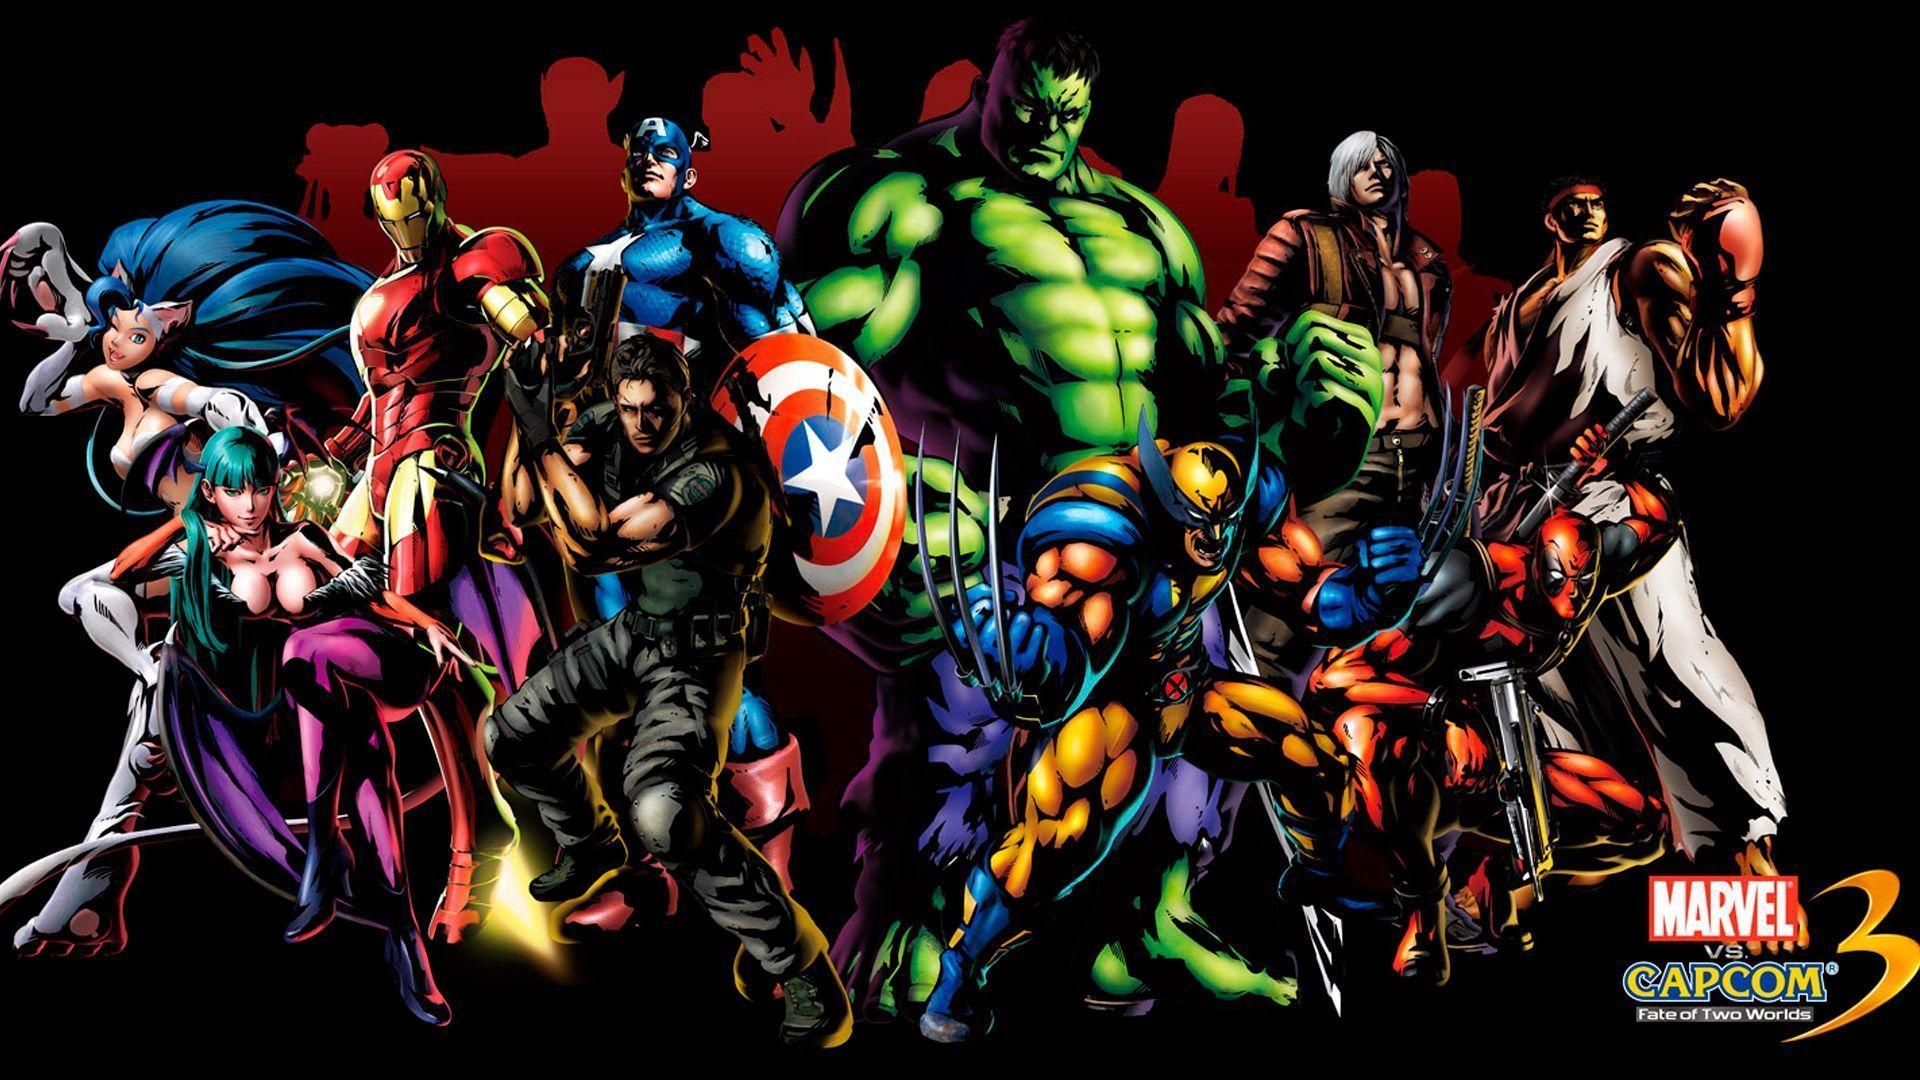 Marvel Wallpaper For iPhone. drawings. Marvel